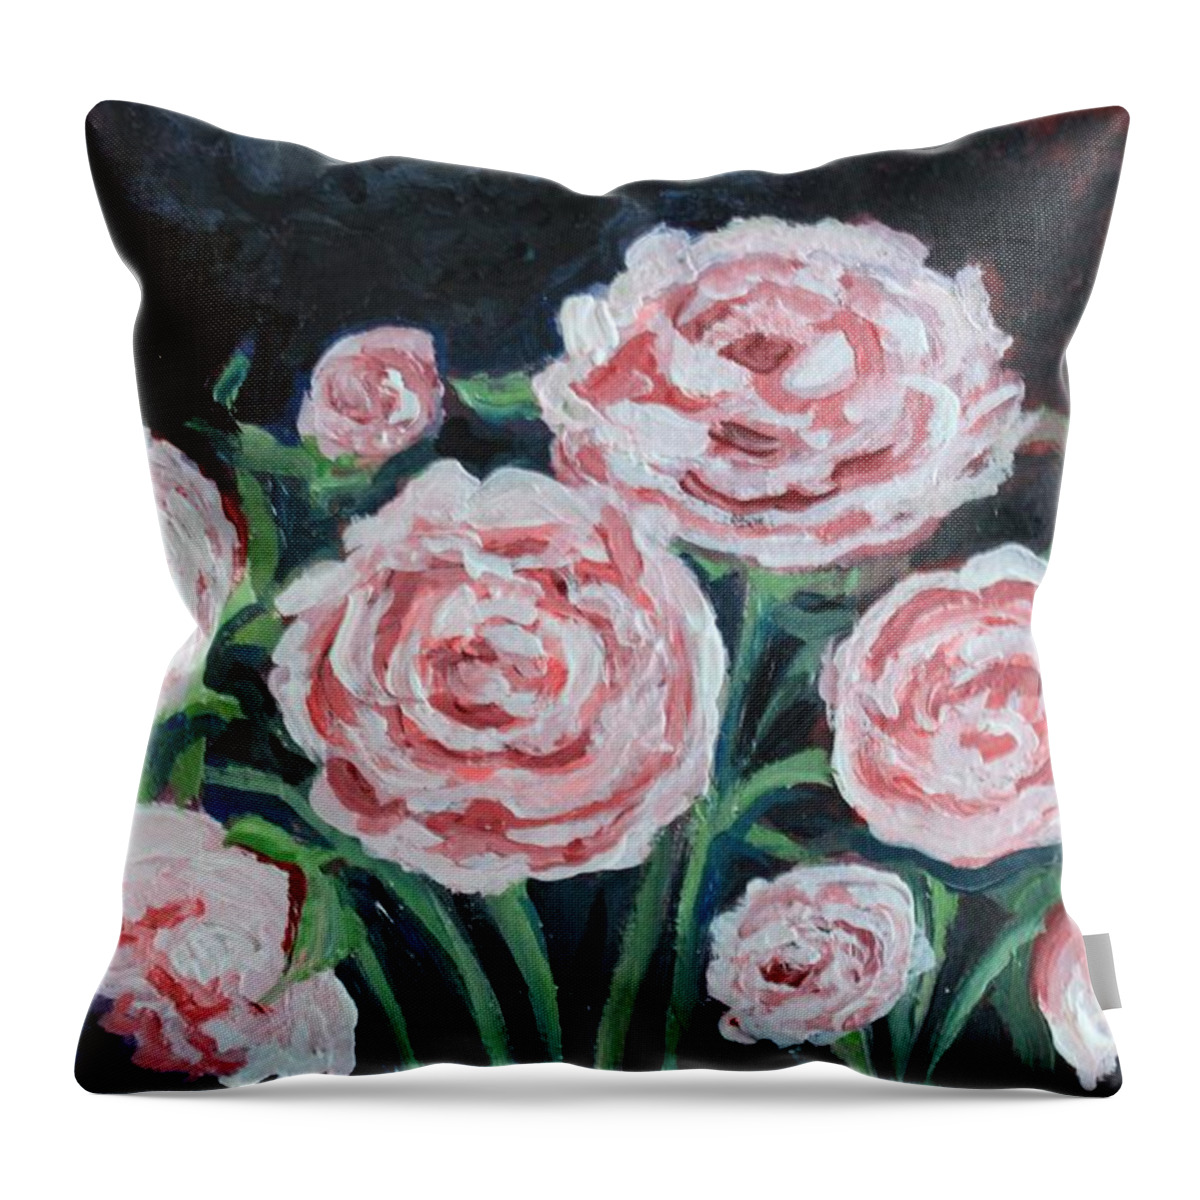 Peonies Throw Pillow featuring the painting Graceful Peonies by Elizabeth Robinette Tyndall